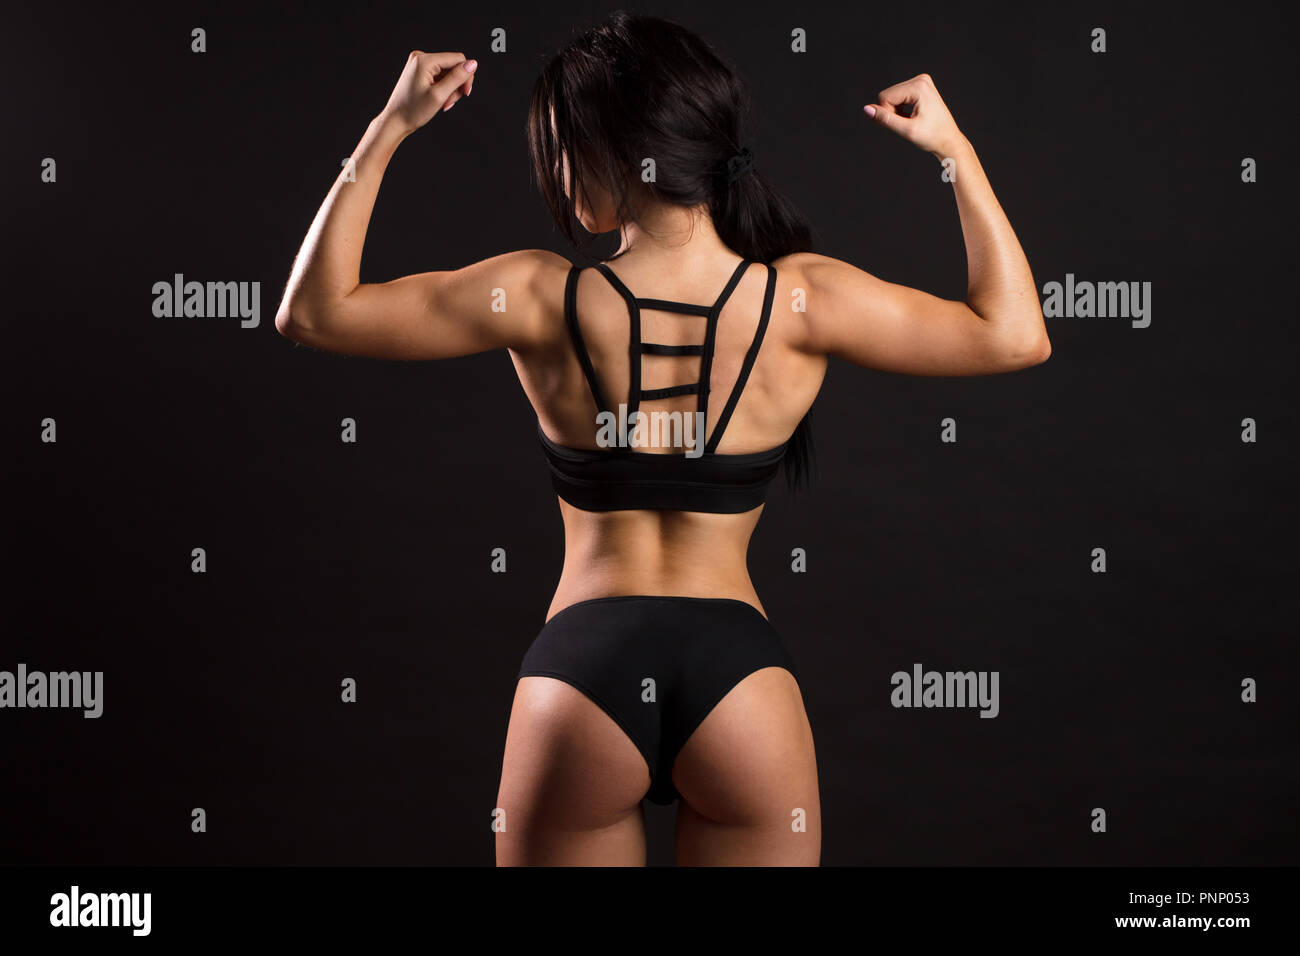 Rear view of woman with muscular body. Fitness female showing muscular back  Stock Photo - Alamy